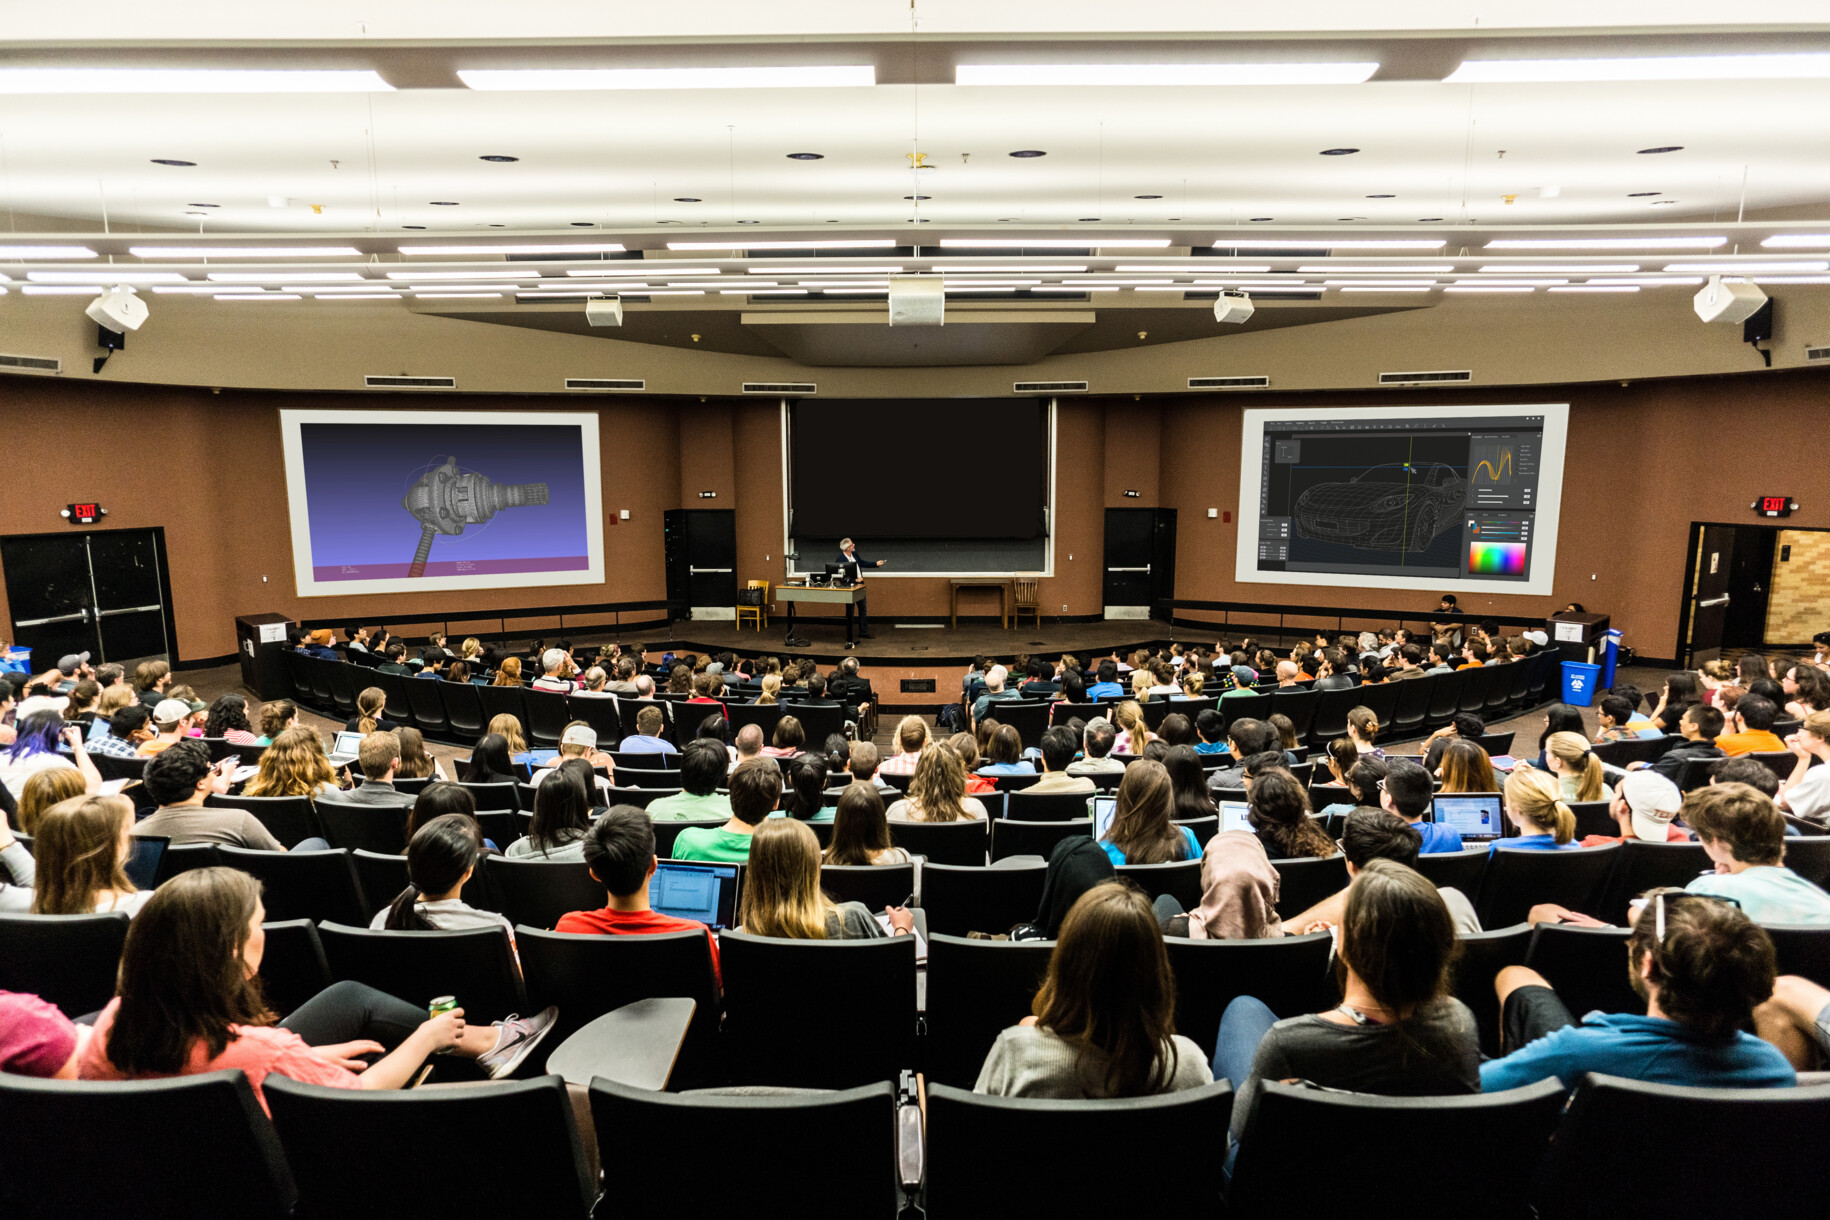 Exploring AV higher education technology in lecture theatres